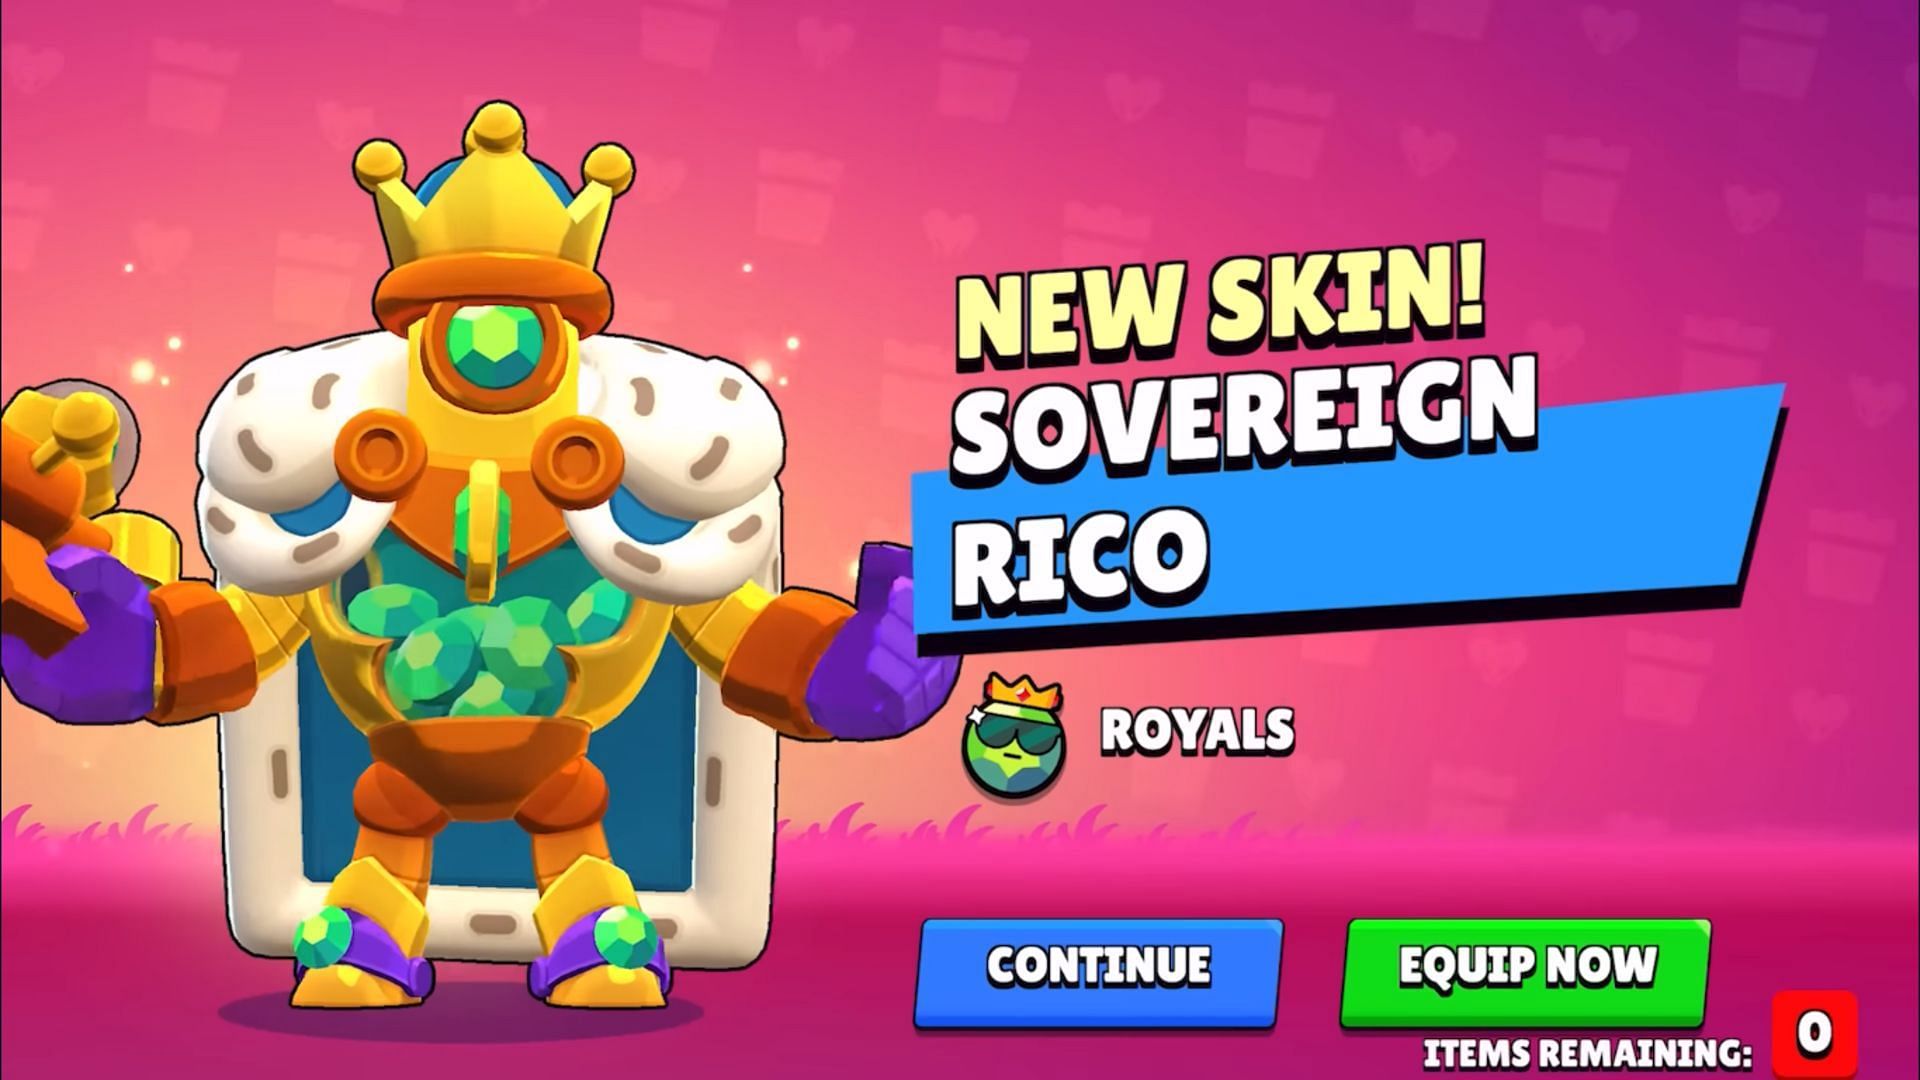 Sovereign Rico (Image via Supercell)